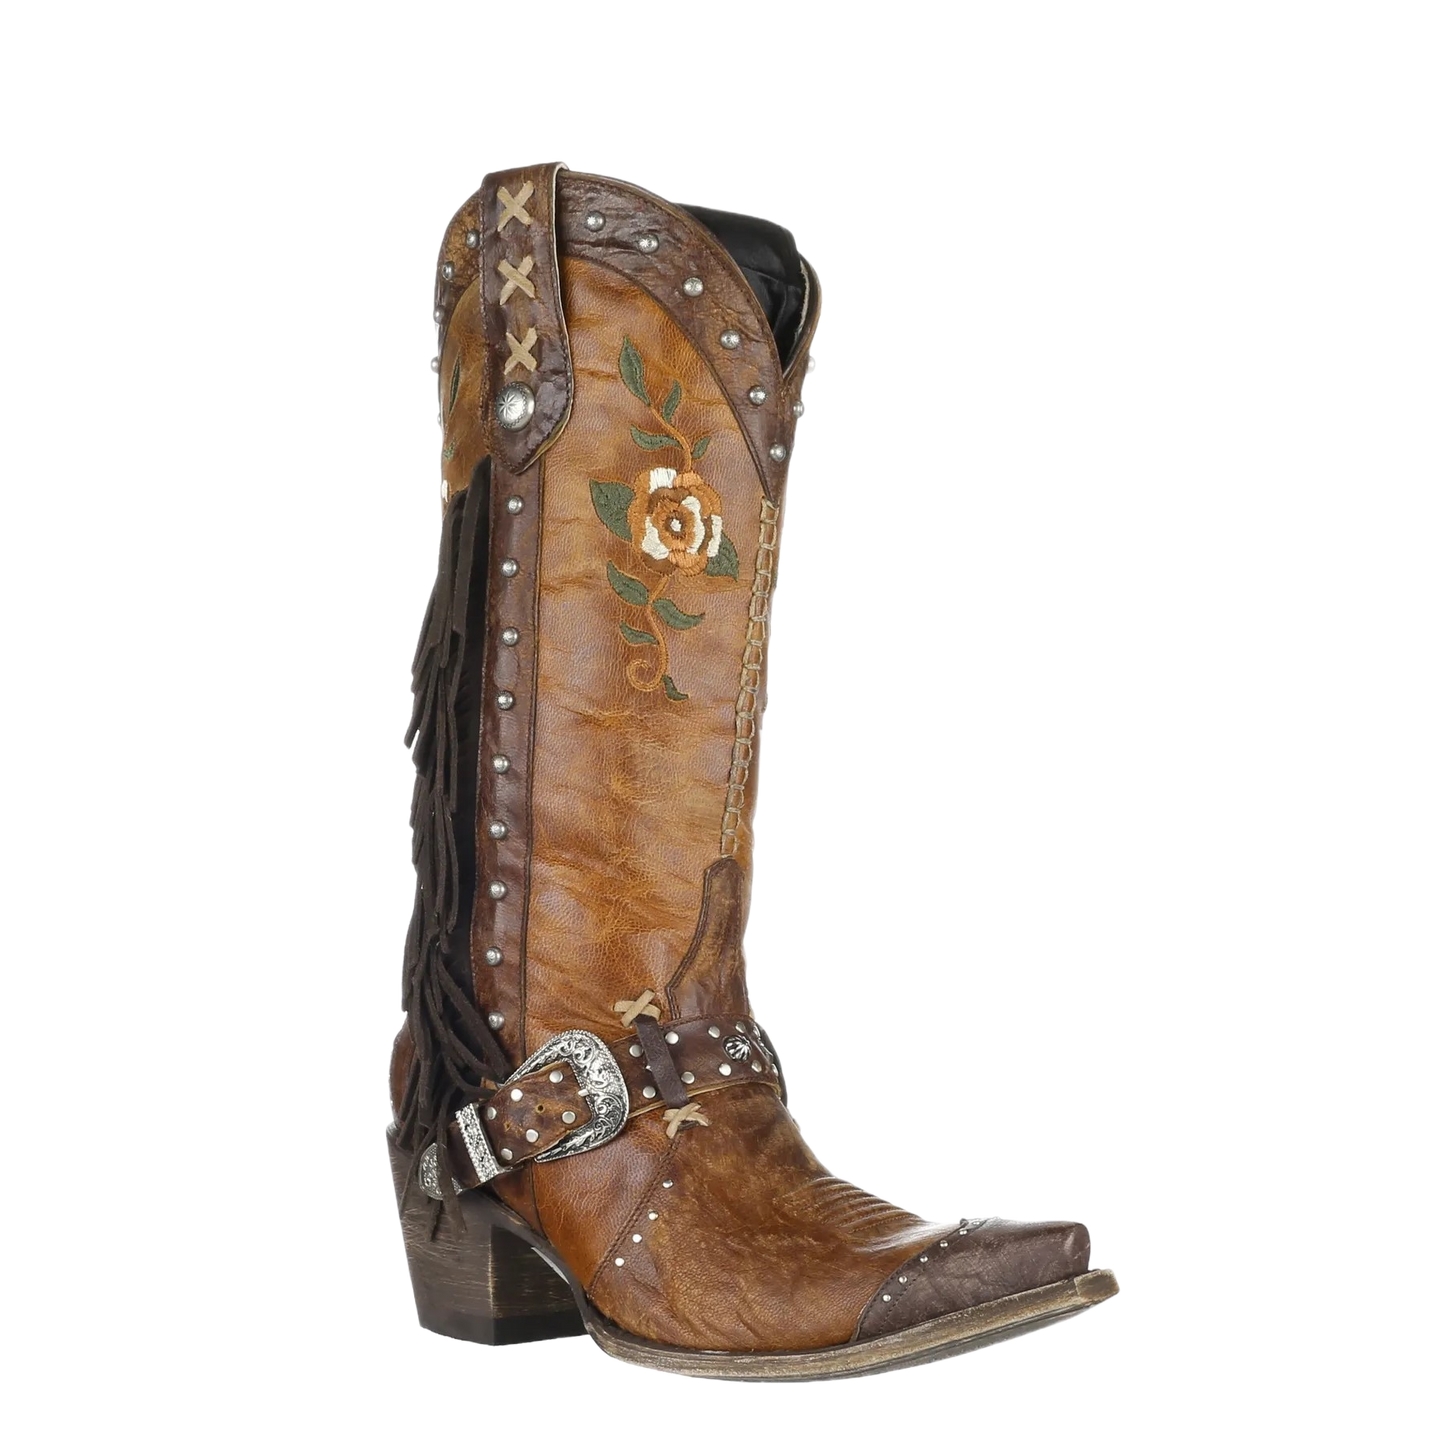 Yippee Ki Yay by Old Gringo Ladies Marielle Brown Floral Boots YBL498-1